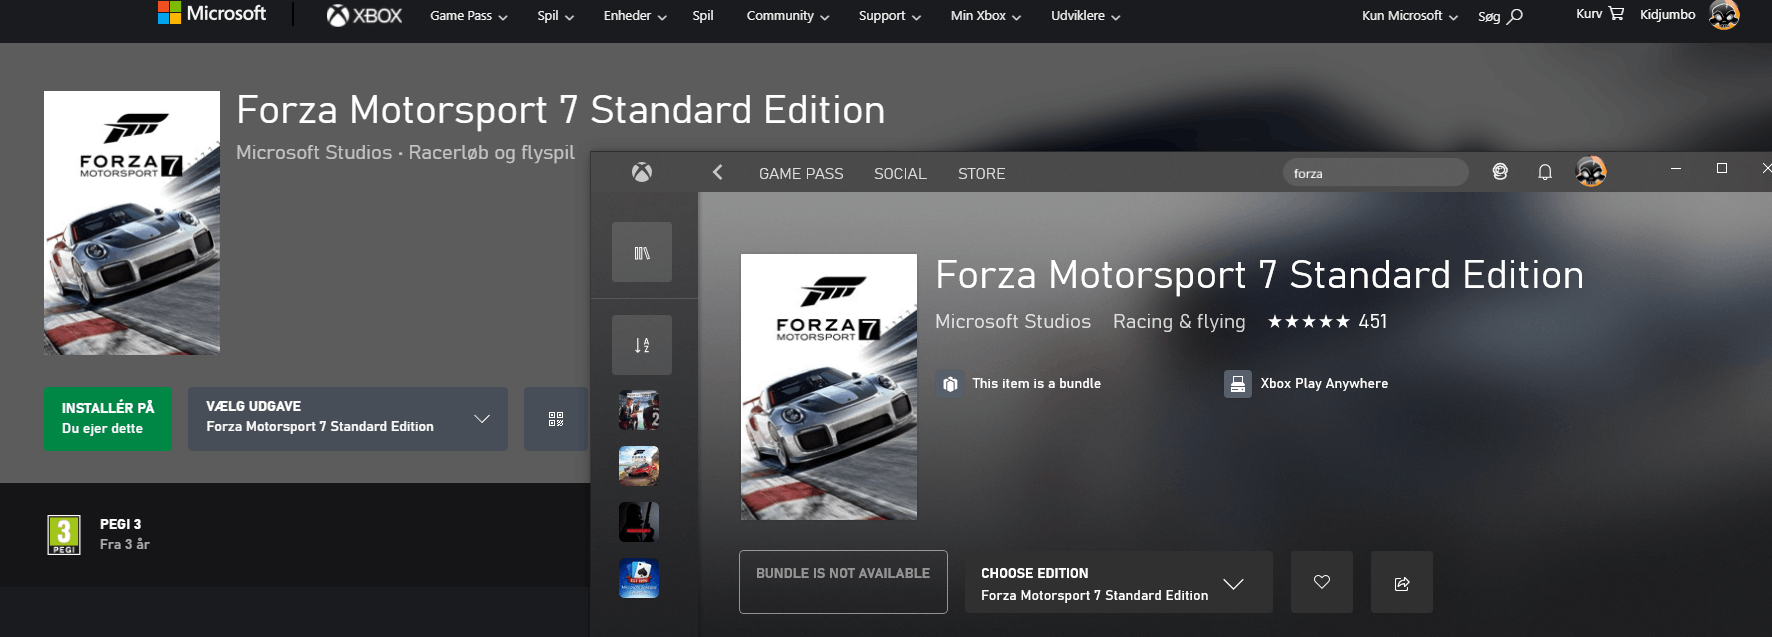 parade jealousy frame Forza Motorsport 7 Showing as not available after purchase - Microsoft  Community